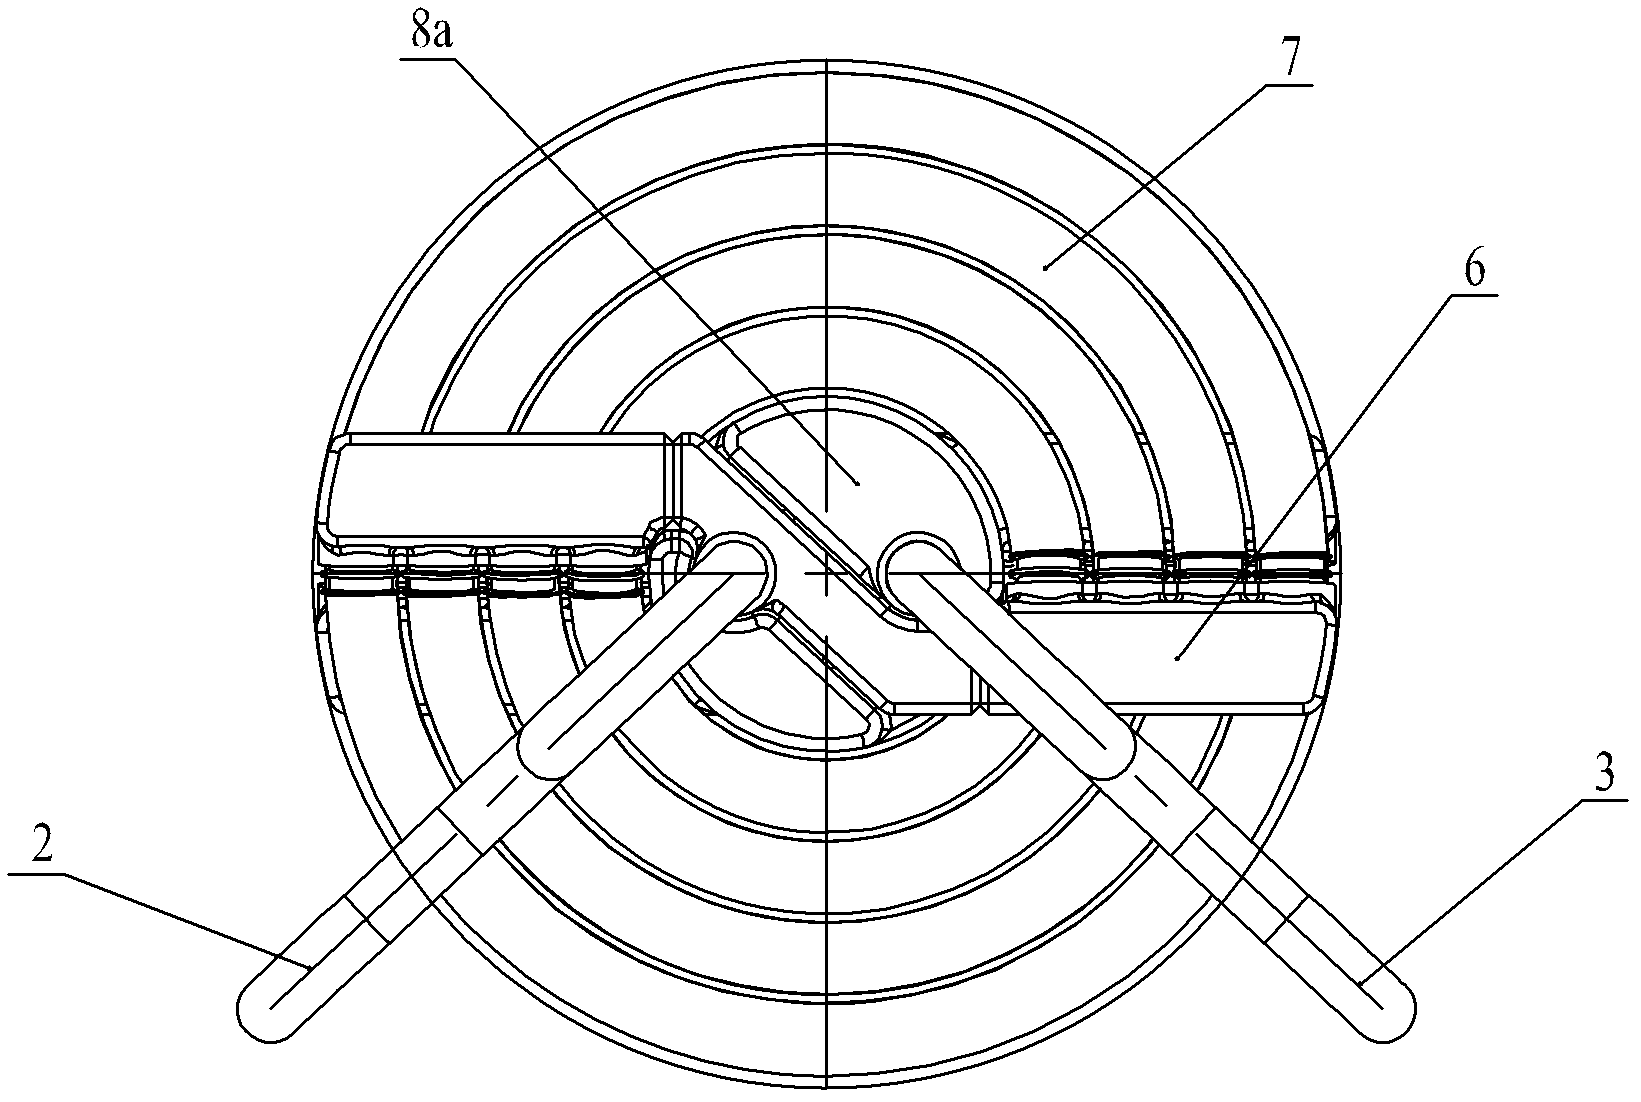 Flue gas waste heat recovery device